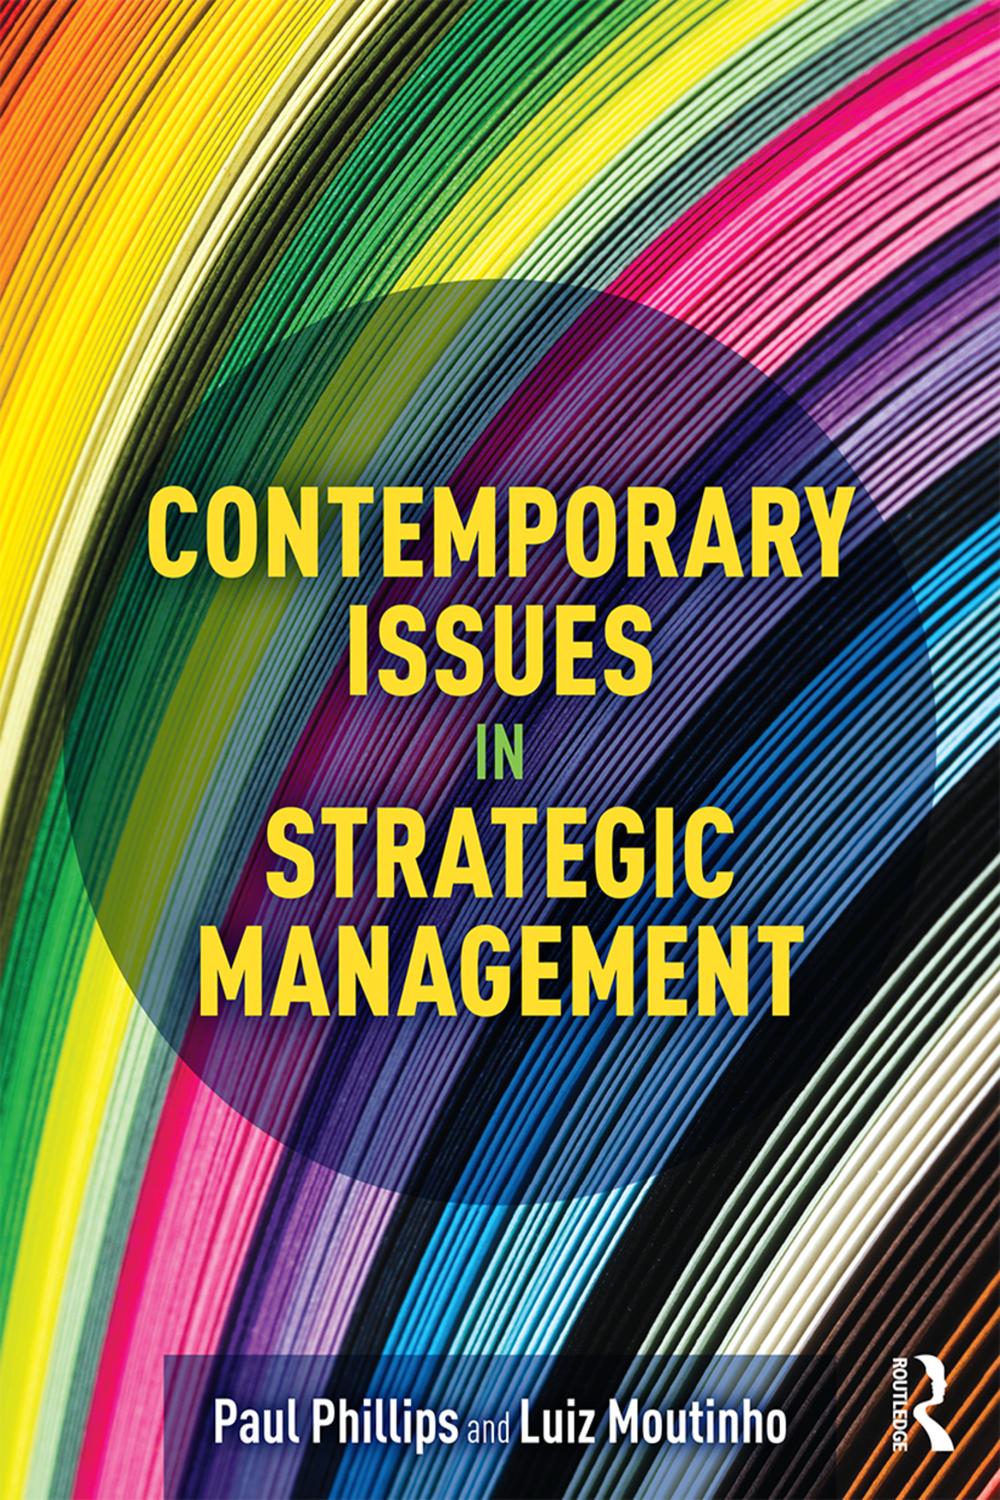 [PDF] Contemporary Issues in Strategic Management by Paul Phillips